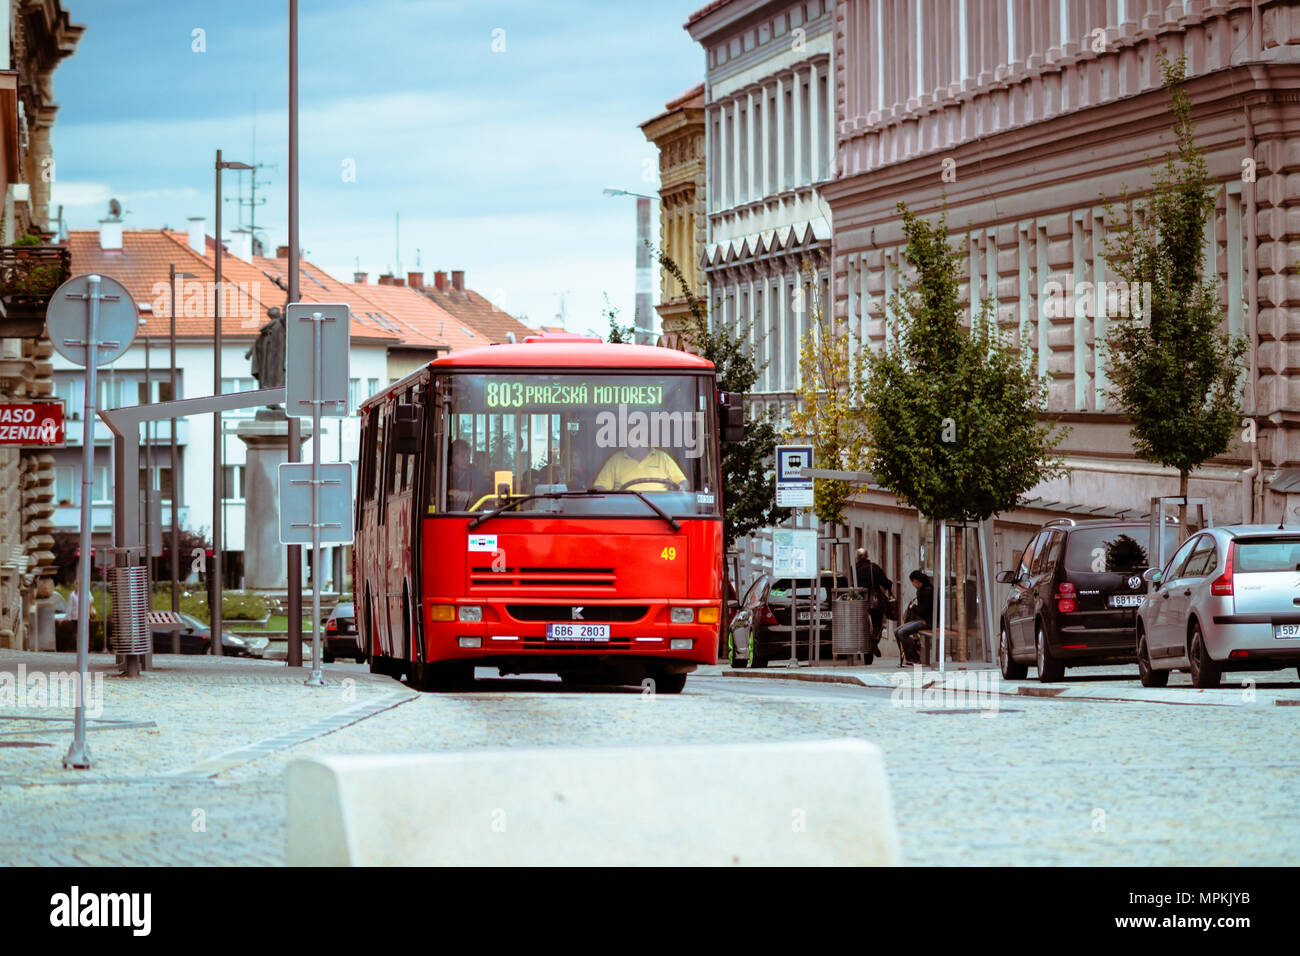 Red public transport bus in Czech Republic (Czechia) with driver and passengers Stock Photo